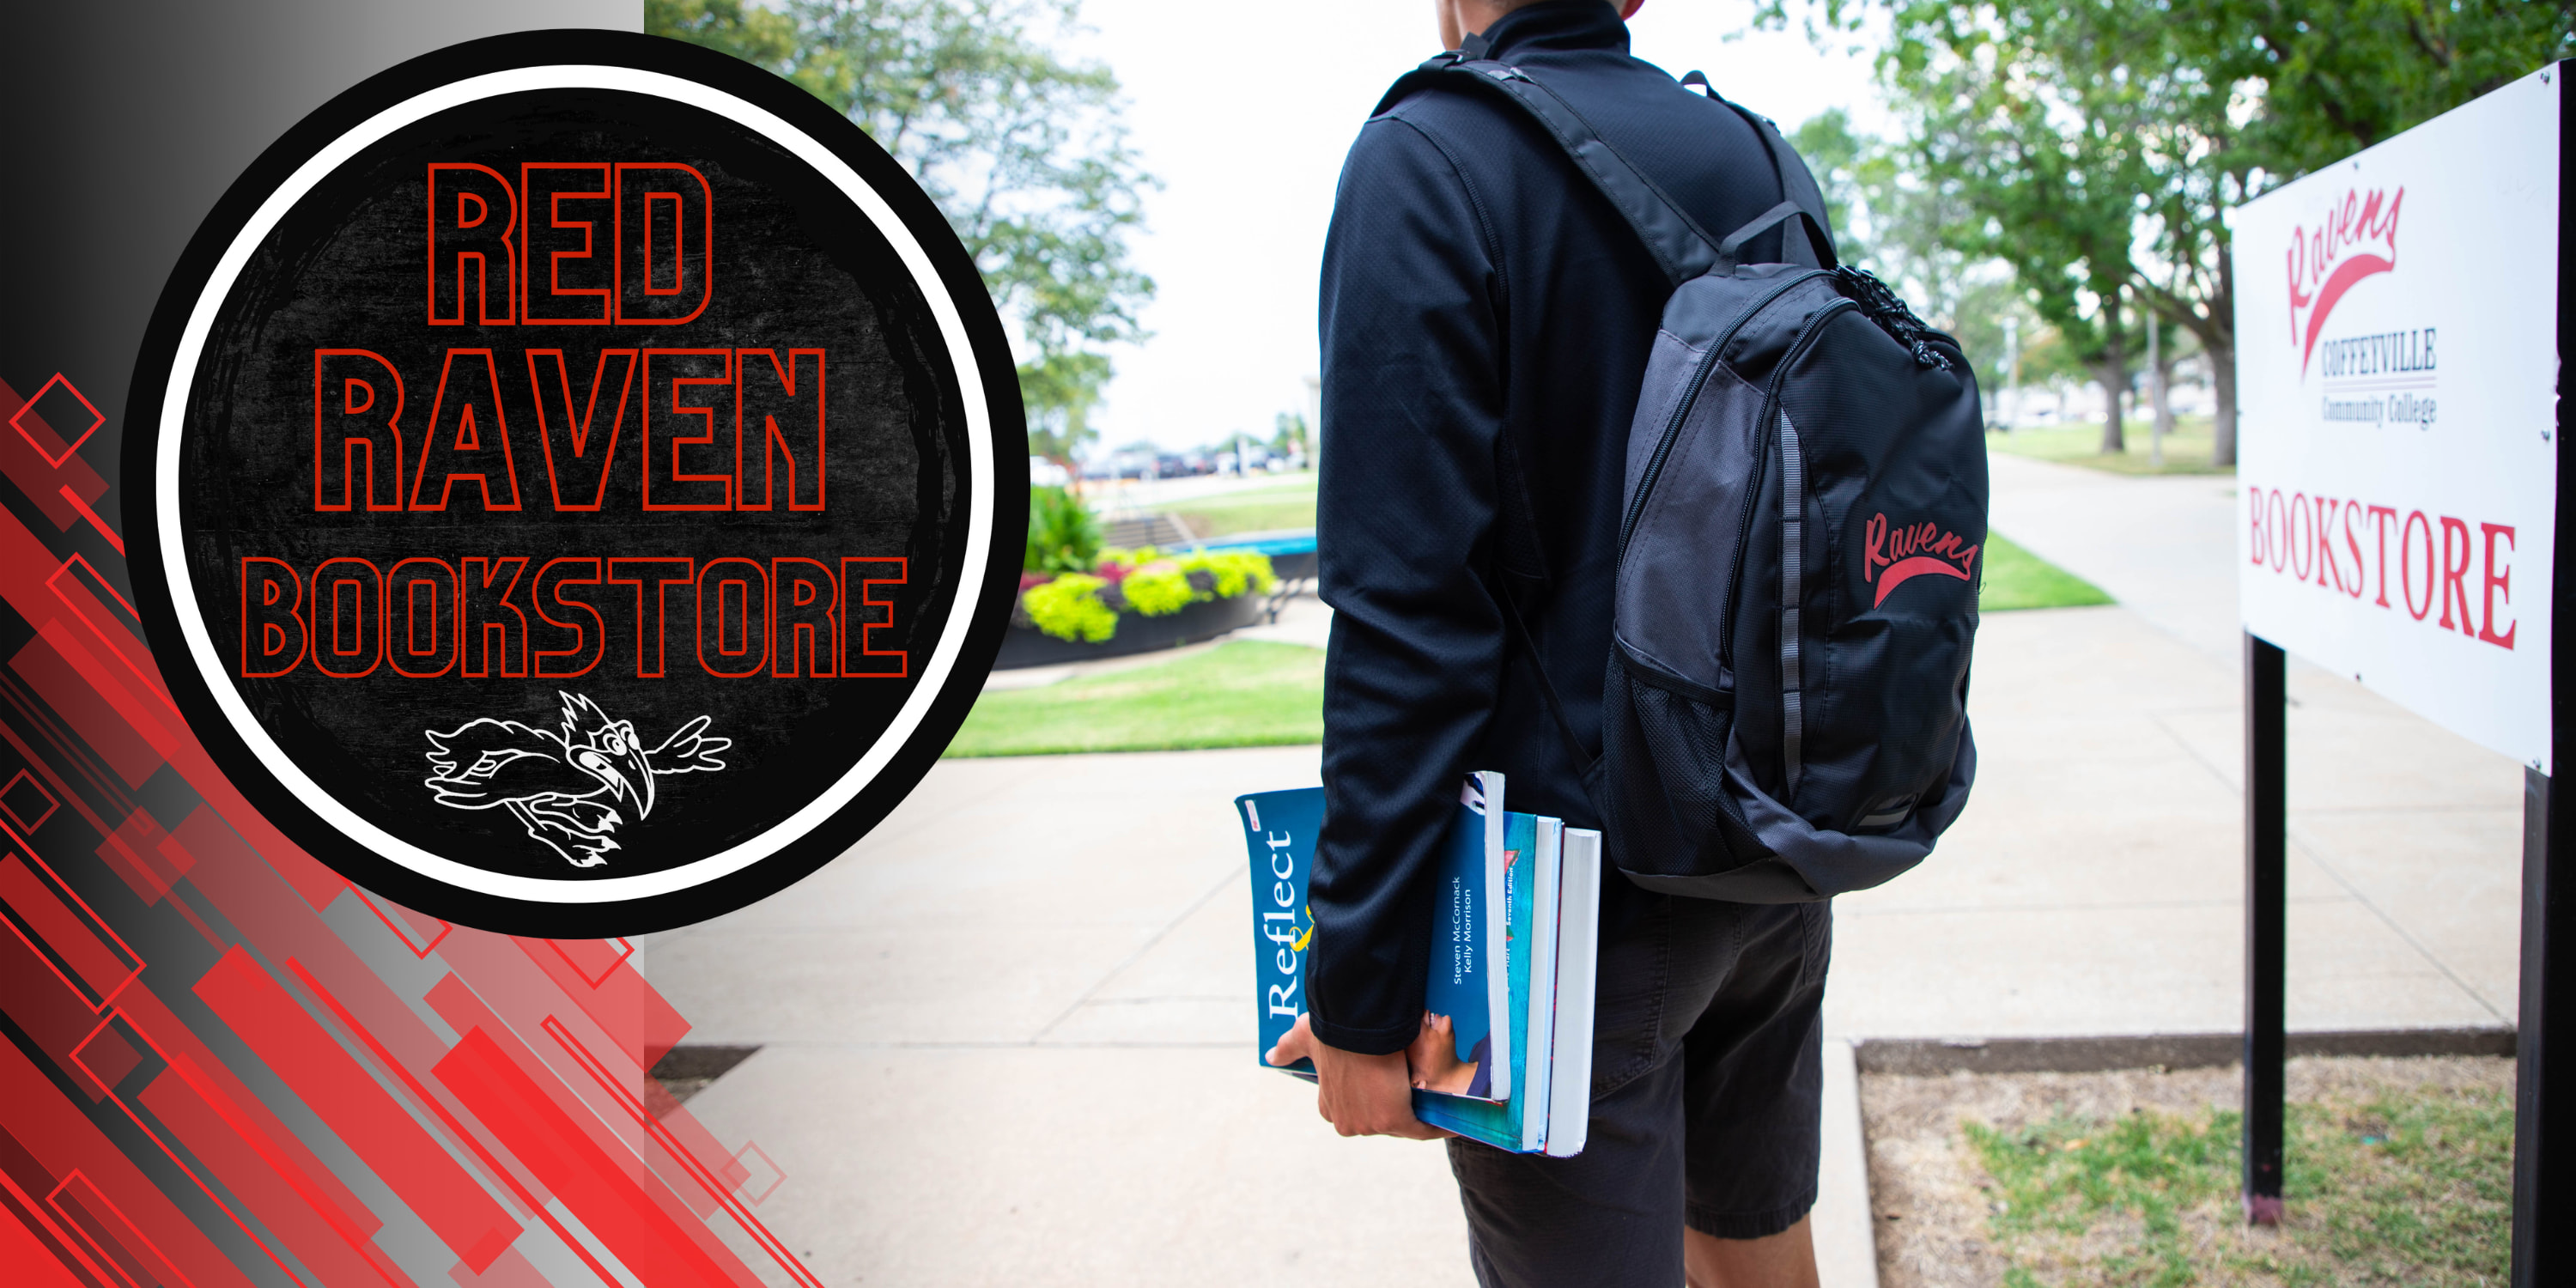 Red Raven Bookstore - Image of student holding books